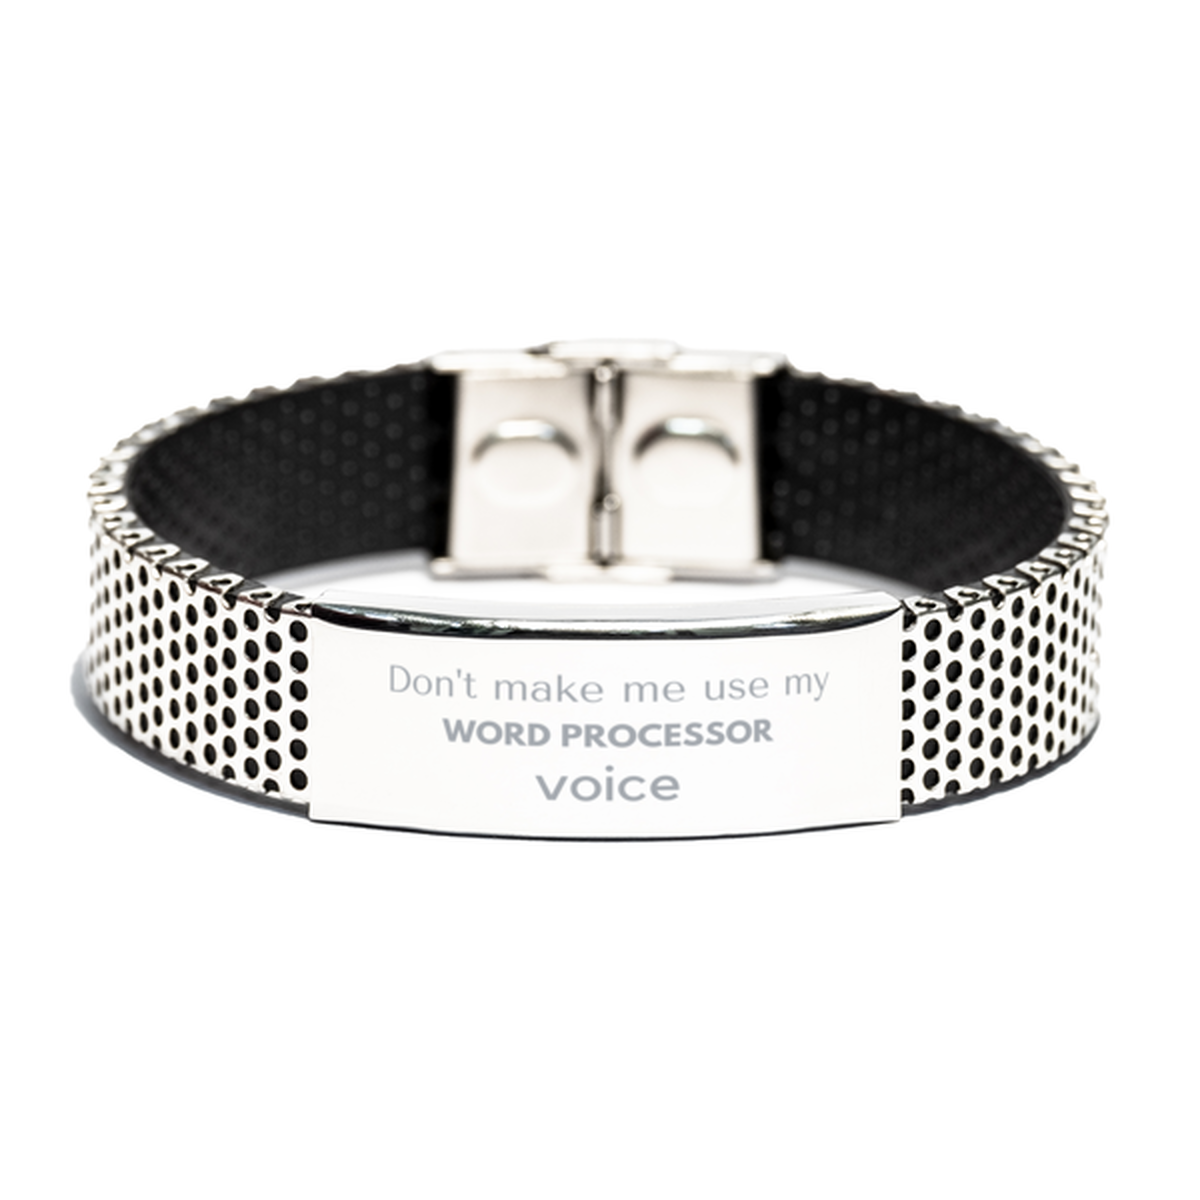 Don't make me use my Word Processor voice, Sarcasm Word Processor Gifts, Christmas Word Processor Stainless Steel Bracelet Birthday Unique Gifts For Word Processor Coworkers, Men, Women, Colleague, Friends